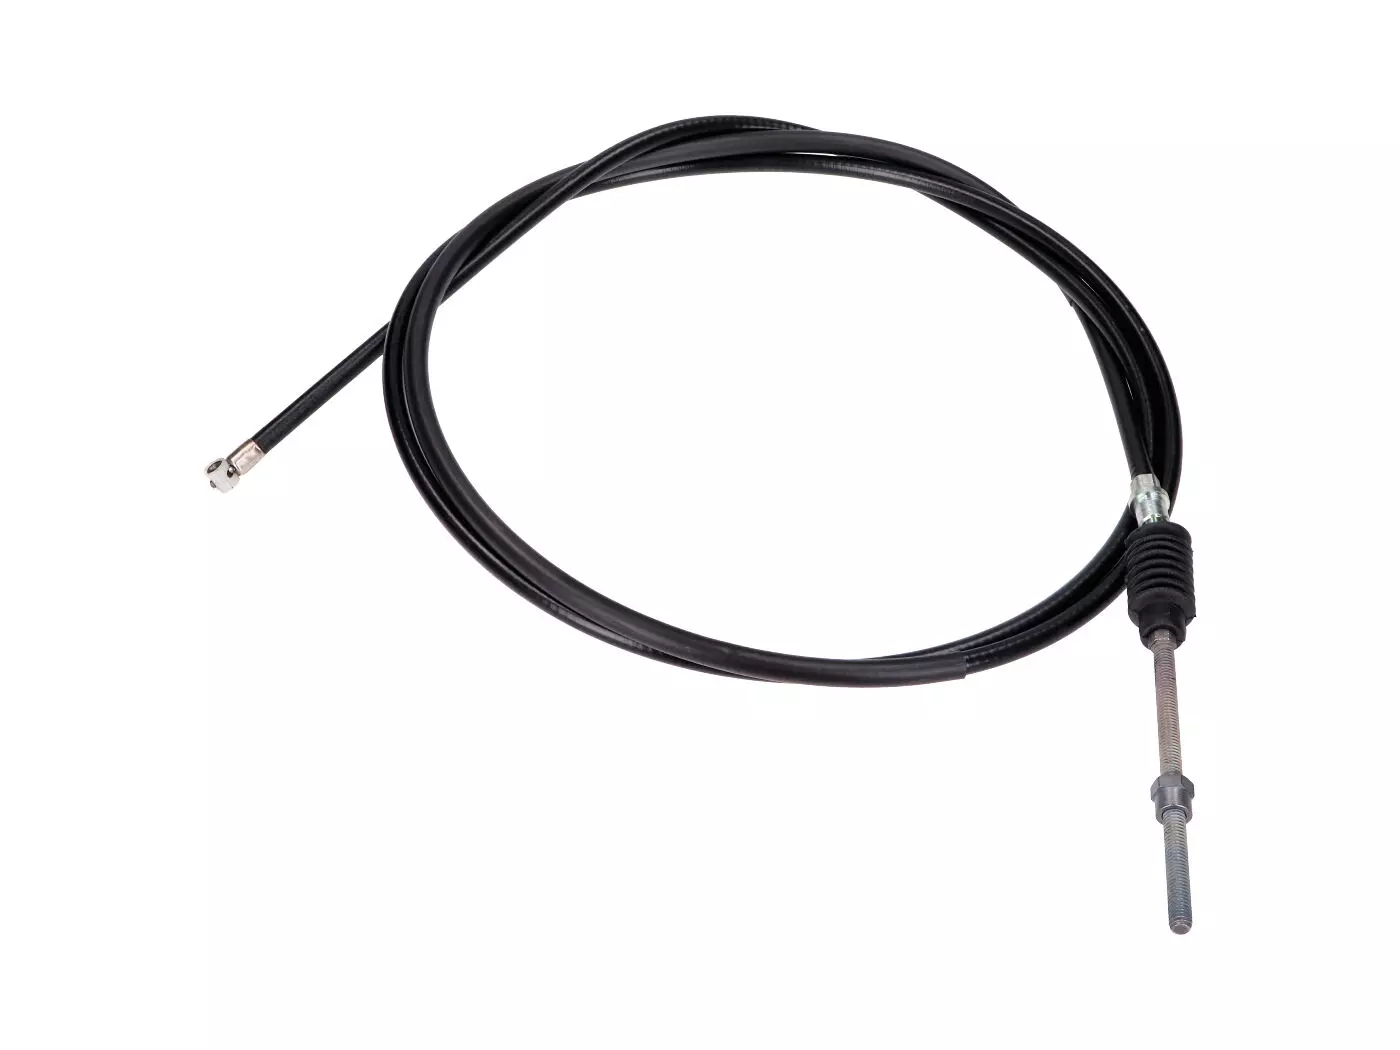 Rear Brake Cable OEM For Piaggio Fly, Derbi Boulevard